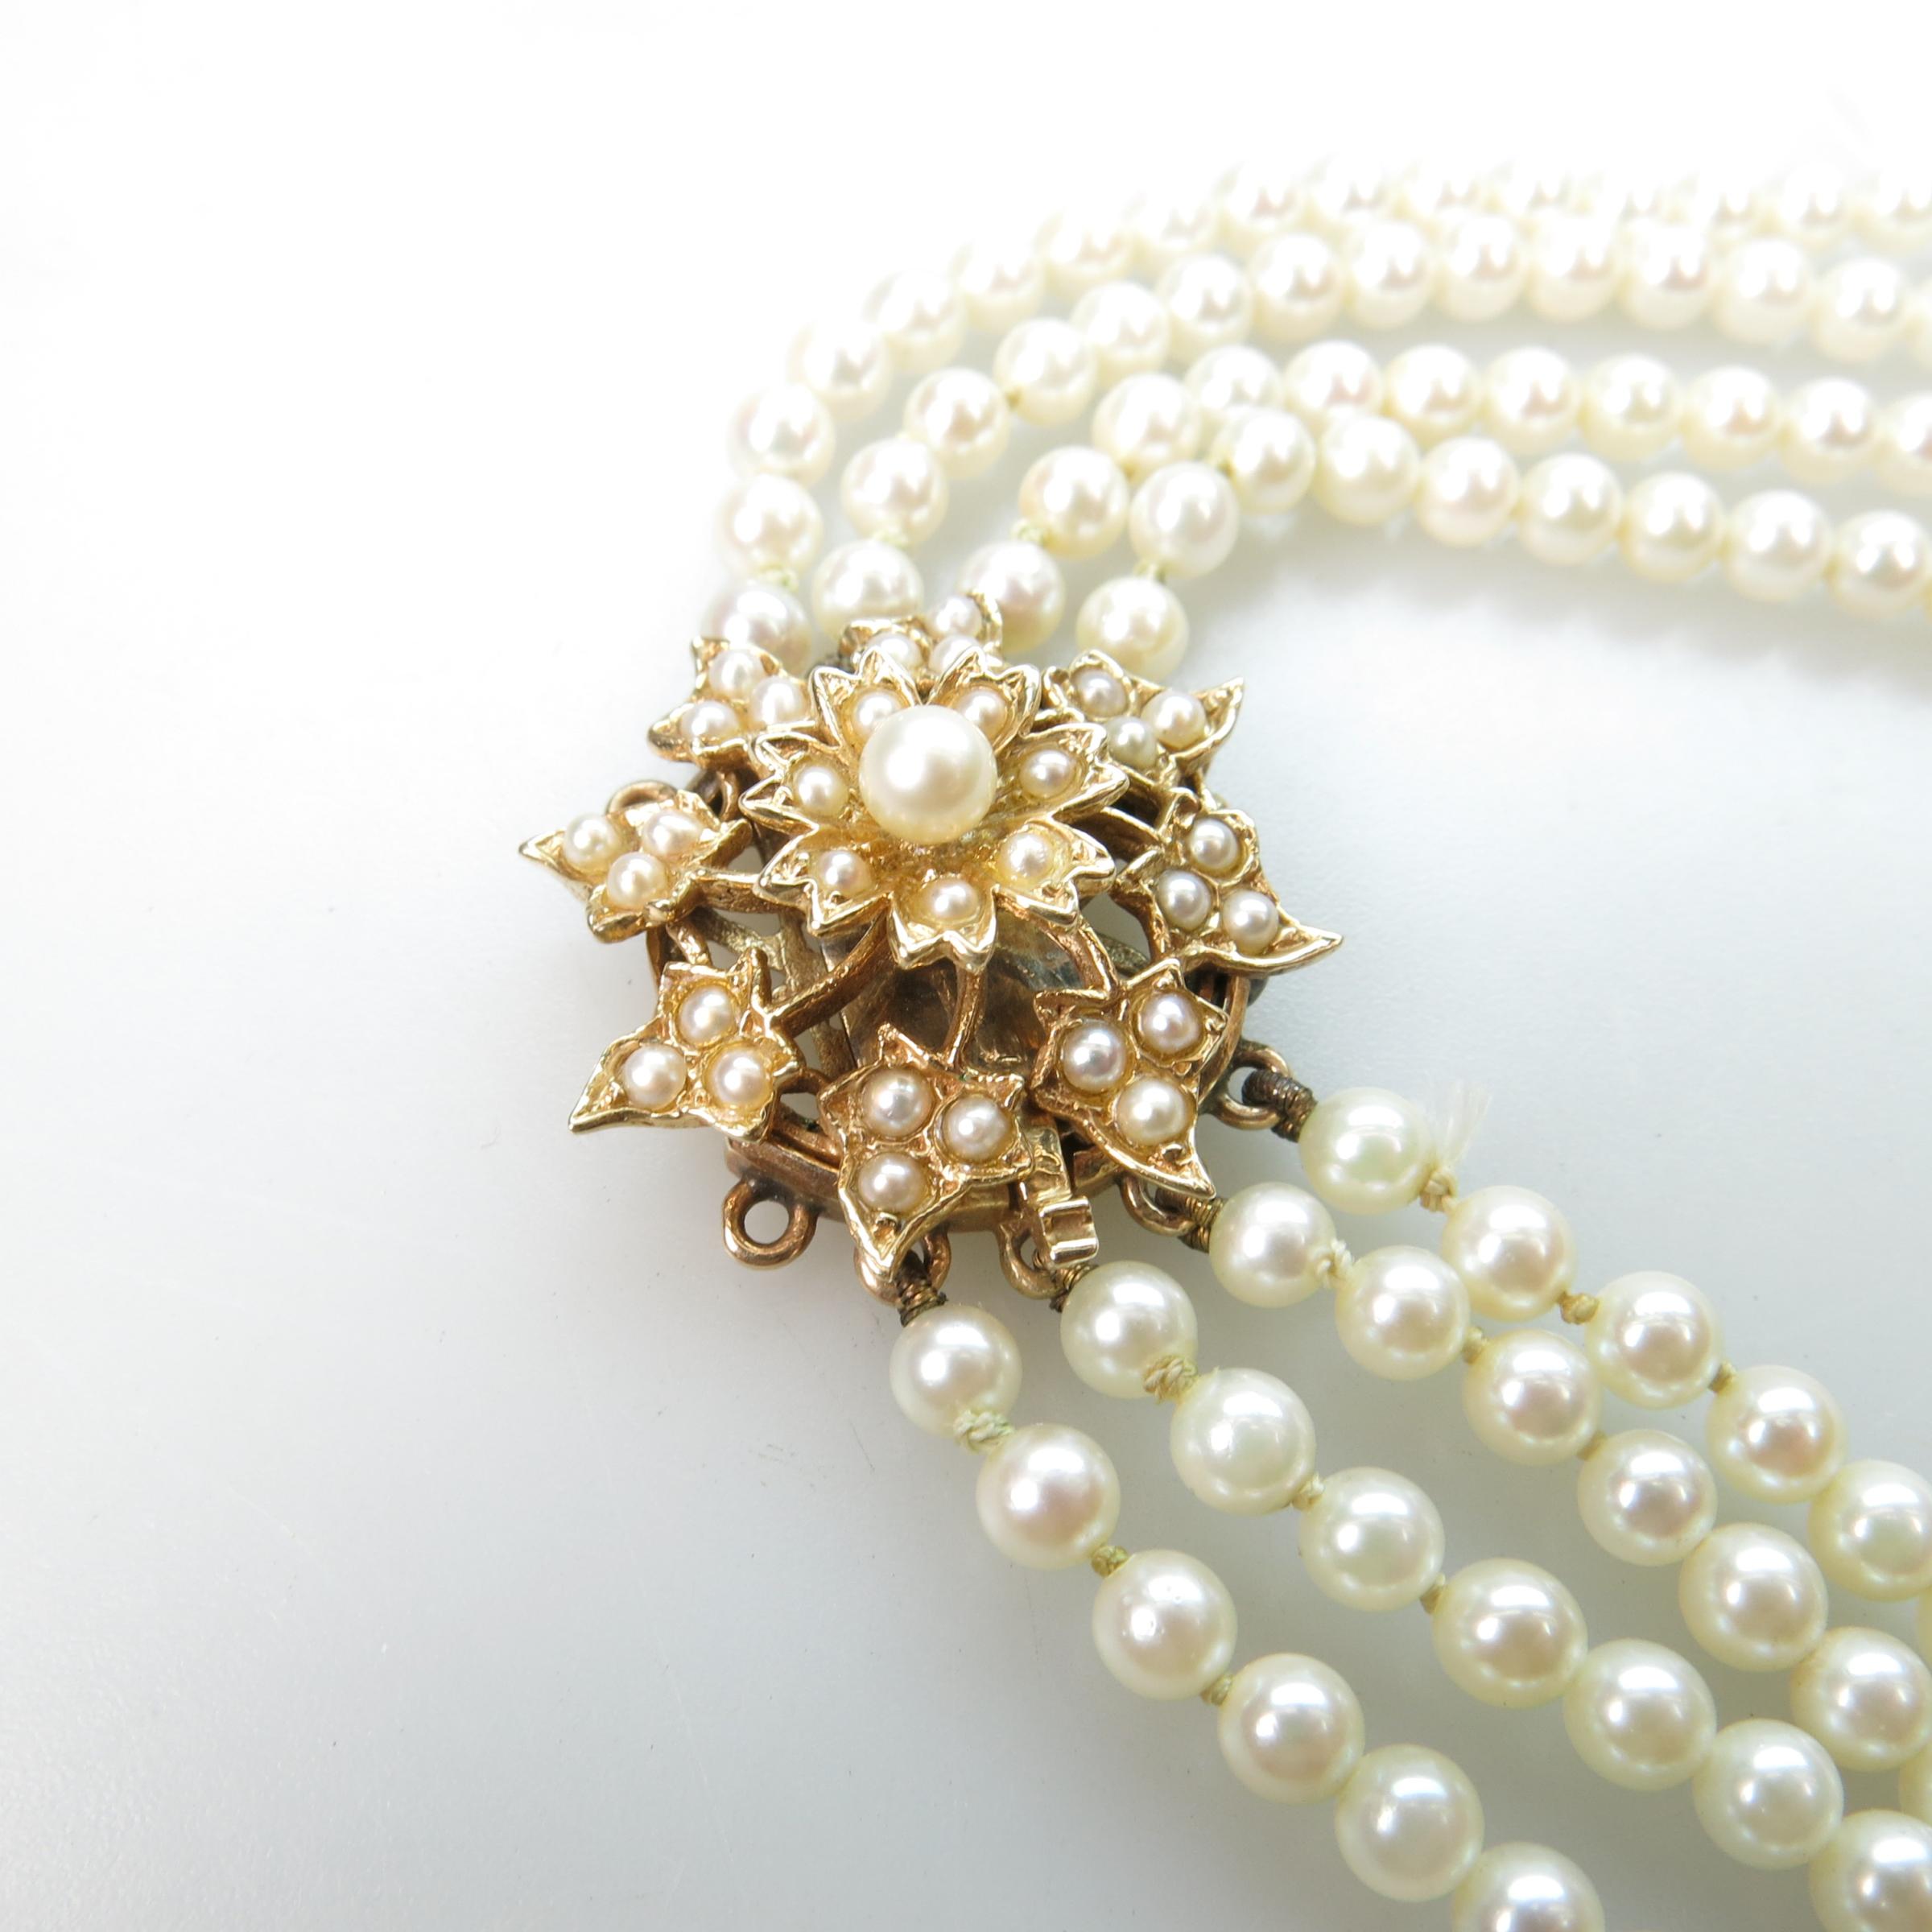 4 Strand Cultured Pearl Necklace